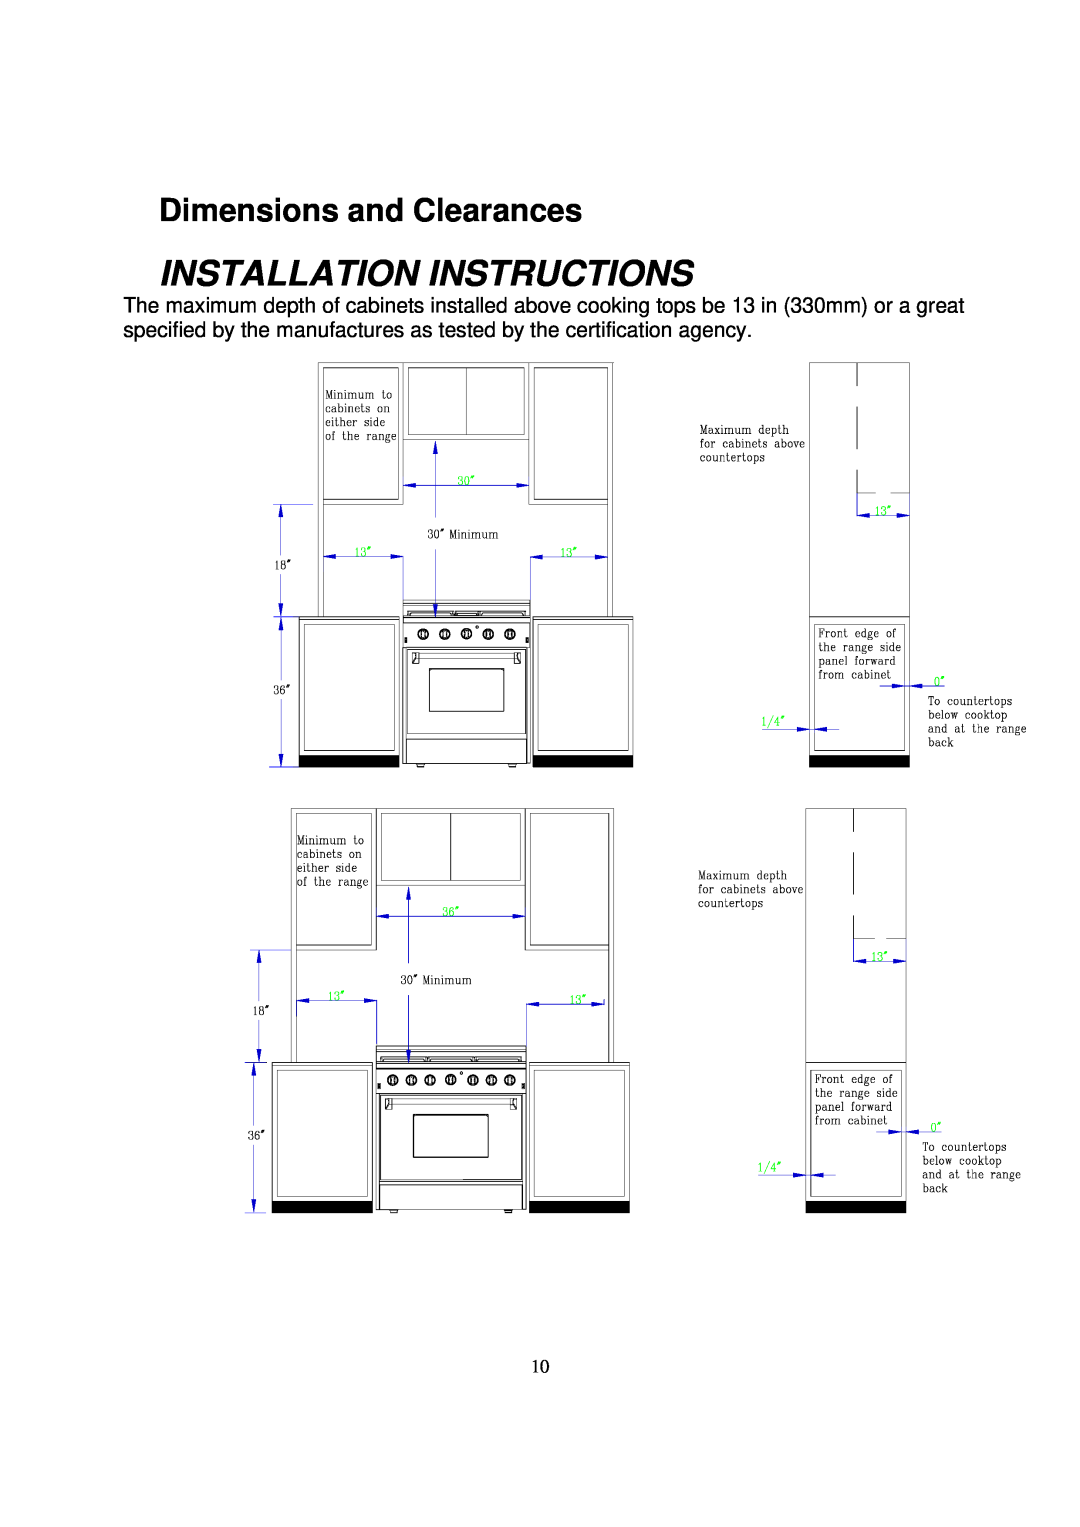 NXR BX3031, DRGB4801, BX3062 manual Installation Instructions, Dimensions and Clearances 